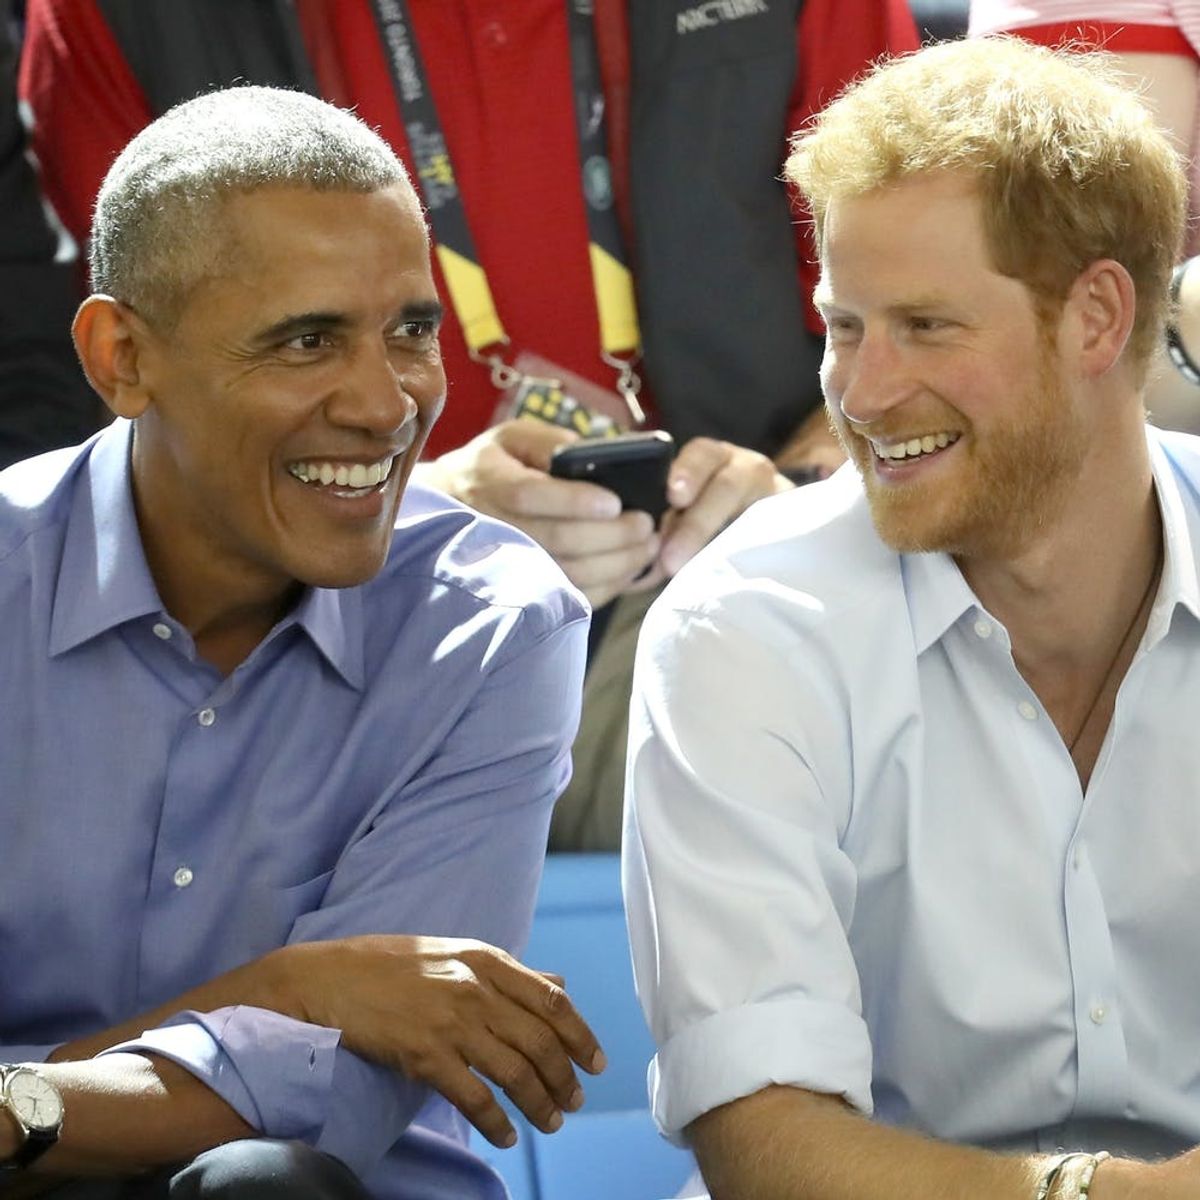 Prince Harry Interviewed Barack Obama and the Teaser Will Make You LOL